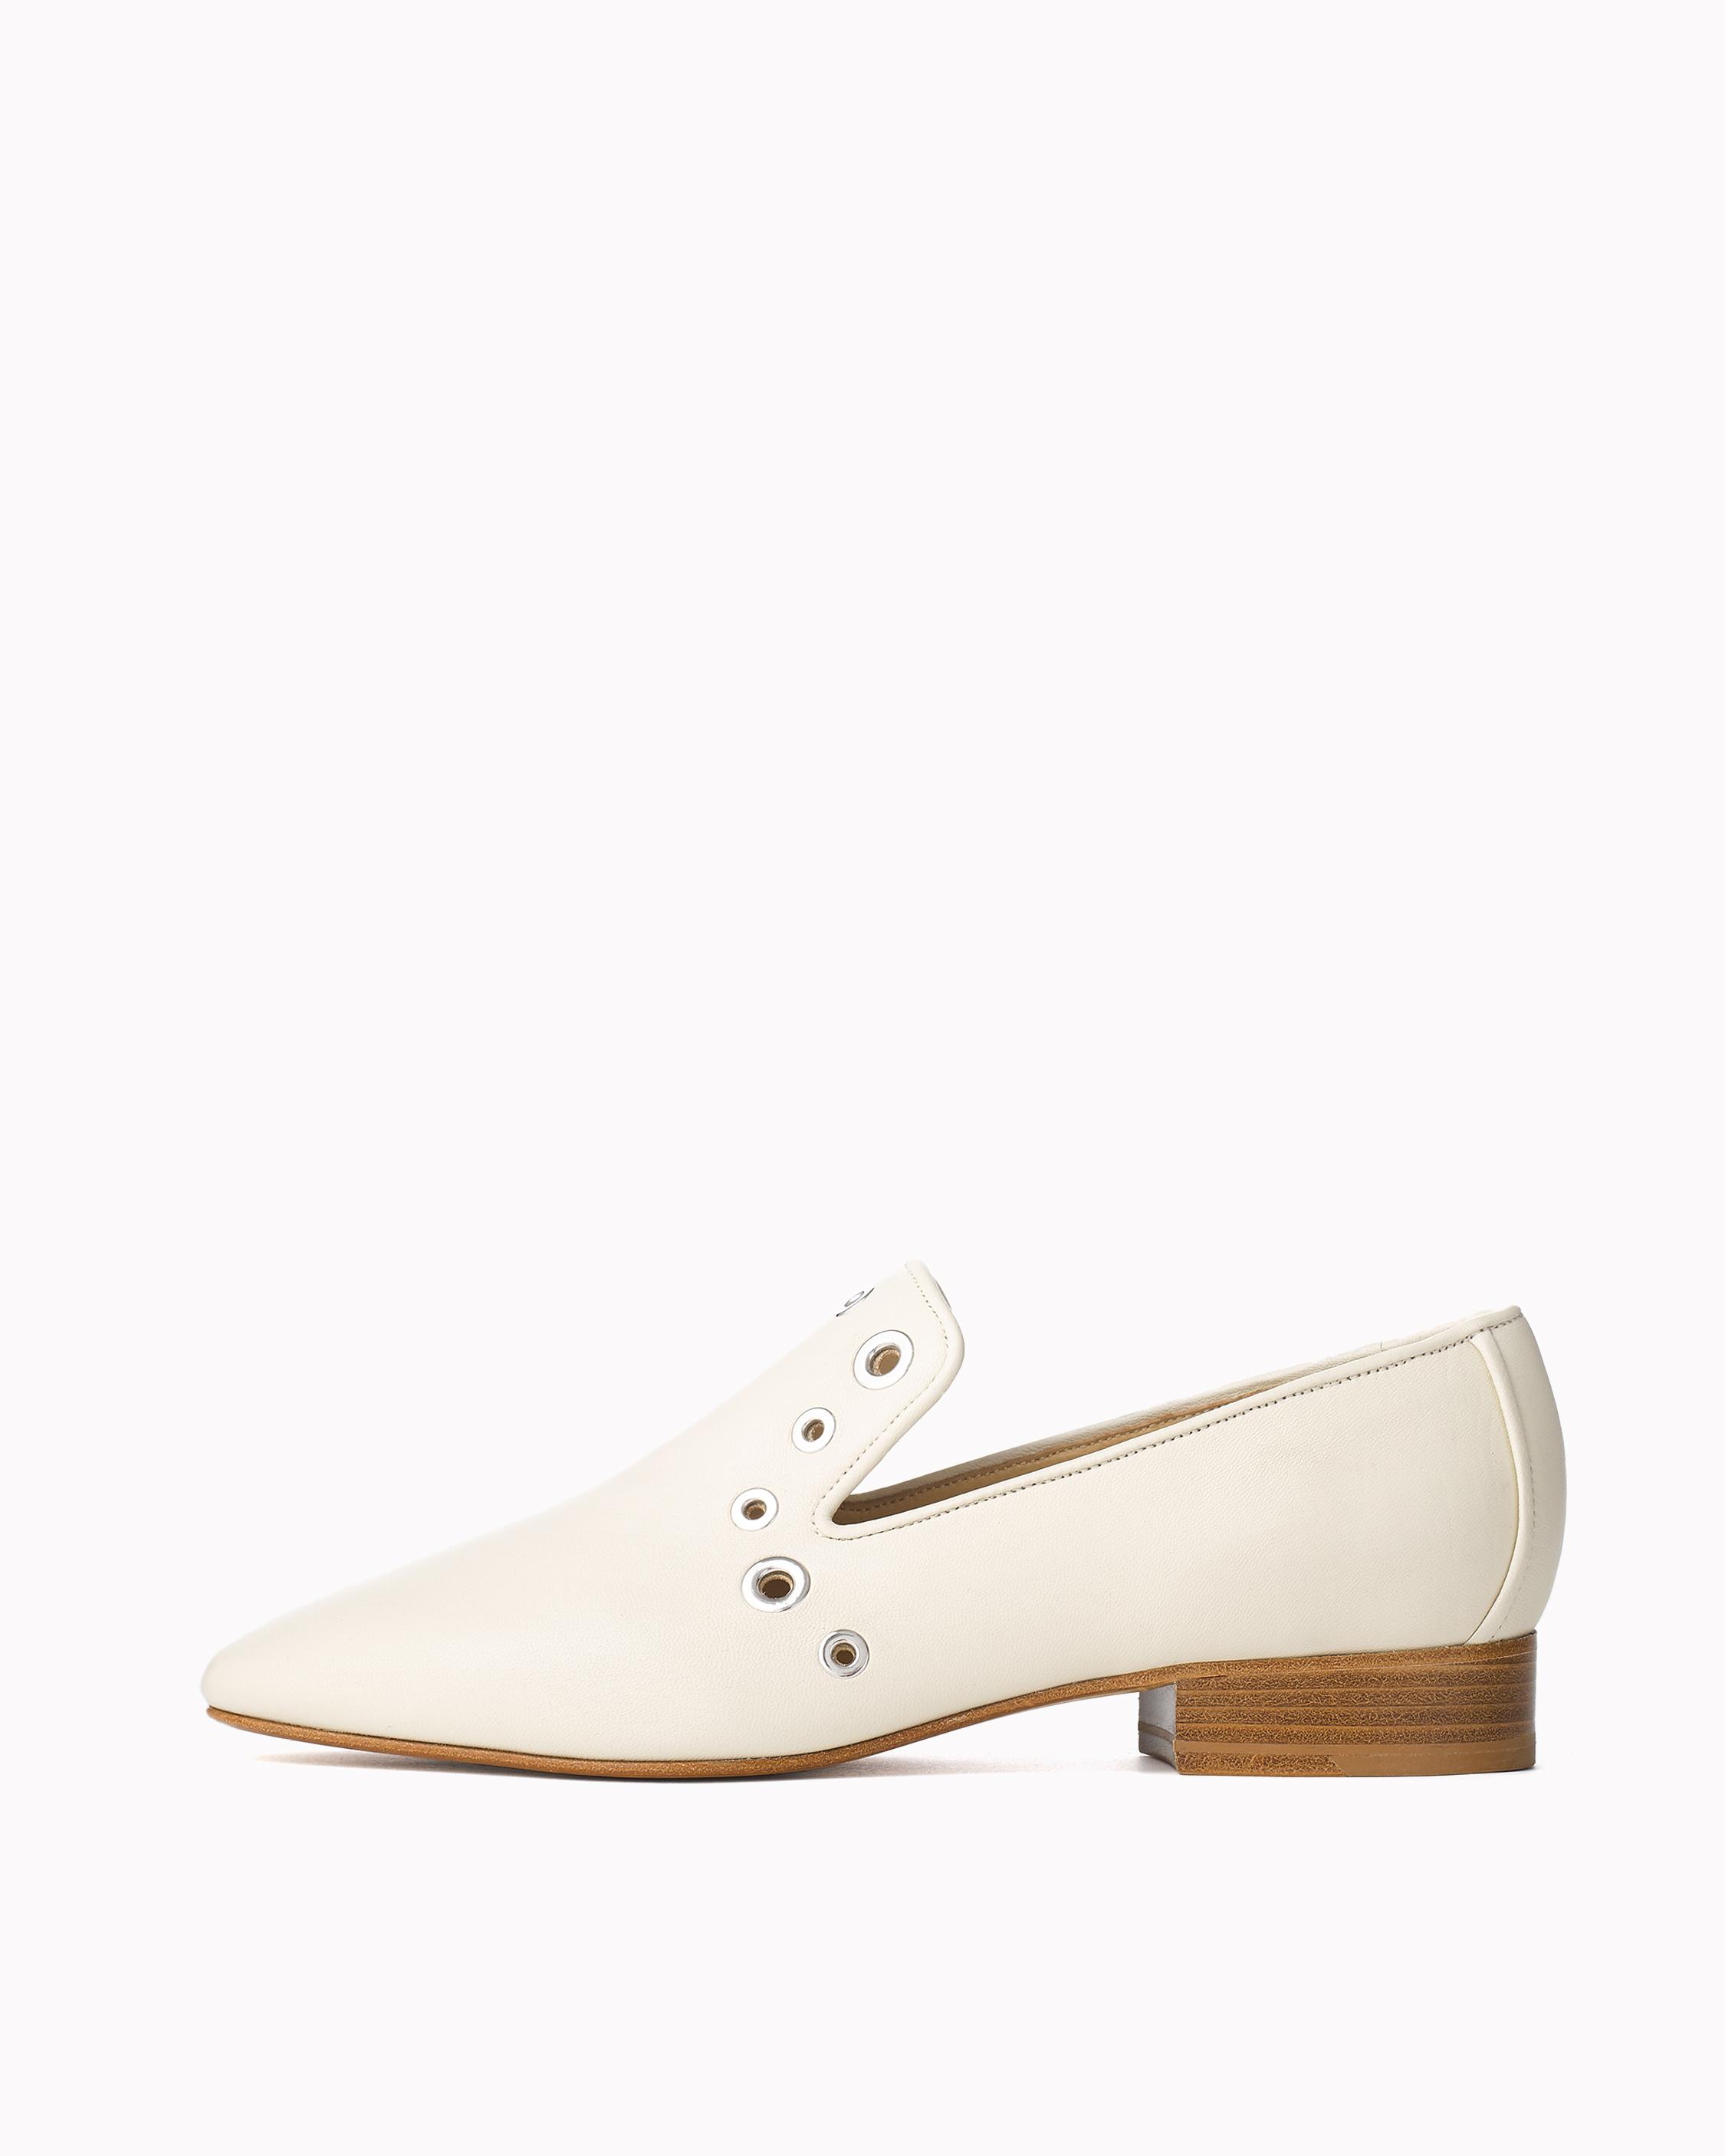 Flats: Oxfords to Loafers, Suede to Velvet with Effortless Urban Style ...